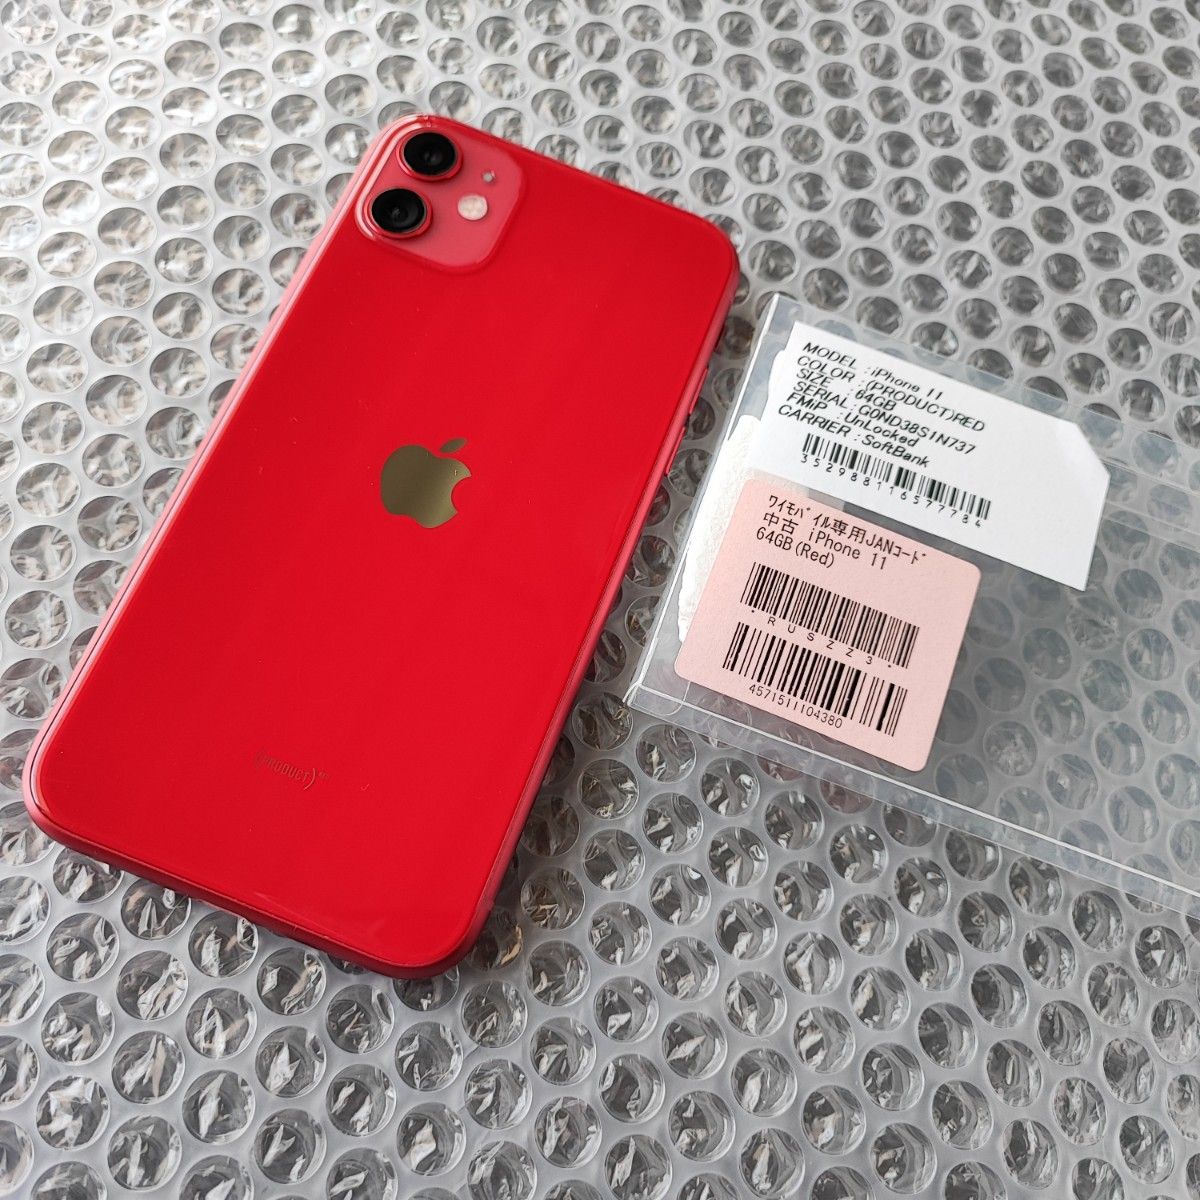 iPhone 11 (PRODUCT)RED 64 GB ソフトバンク認定品-